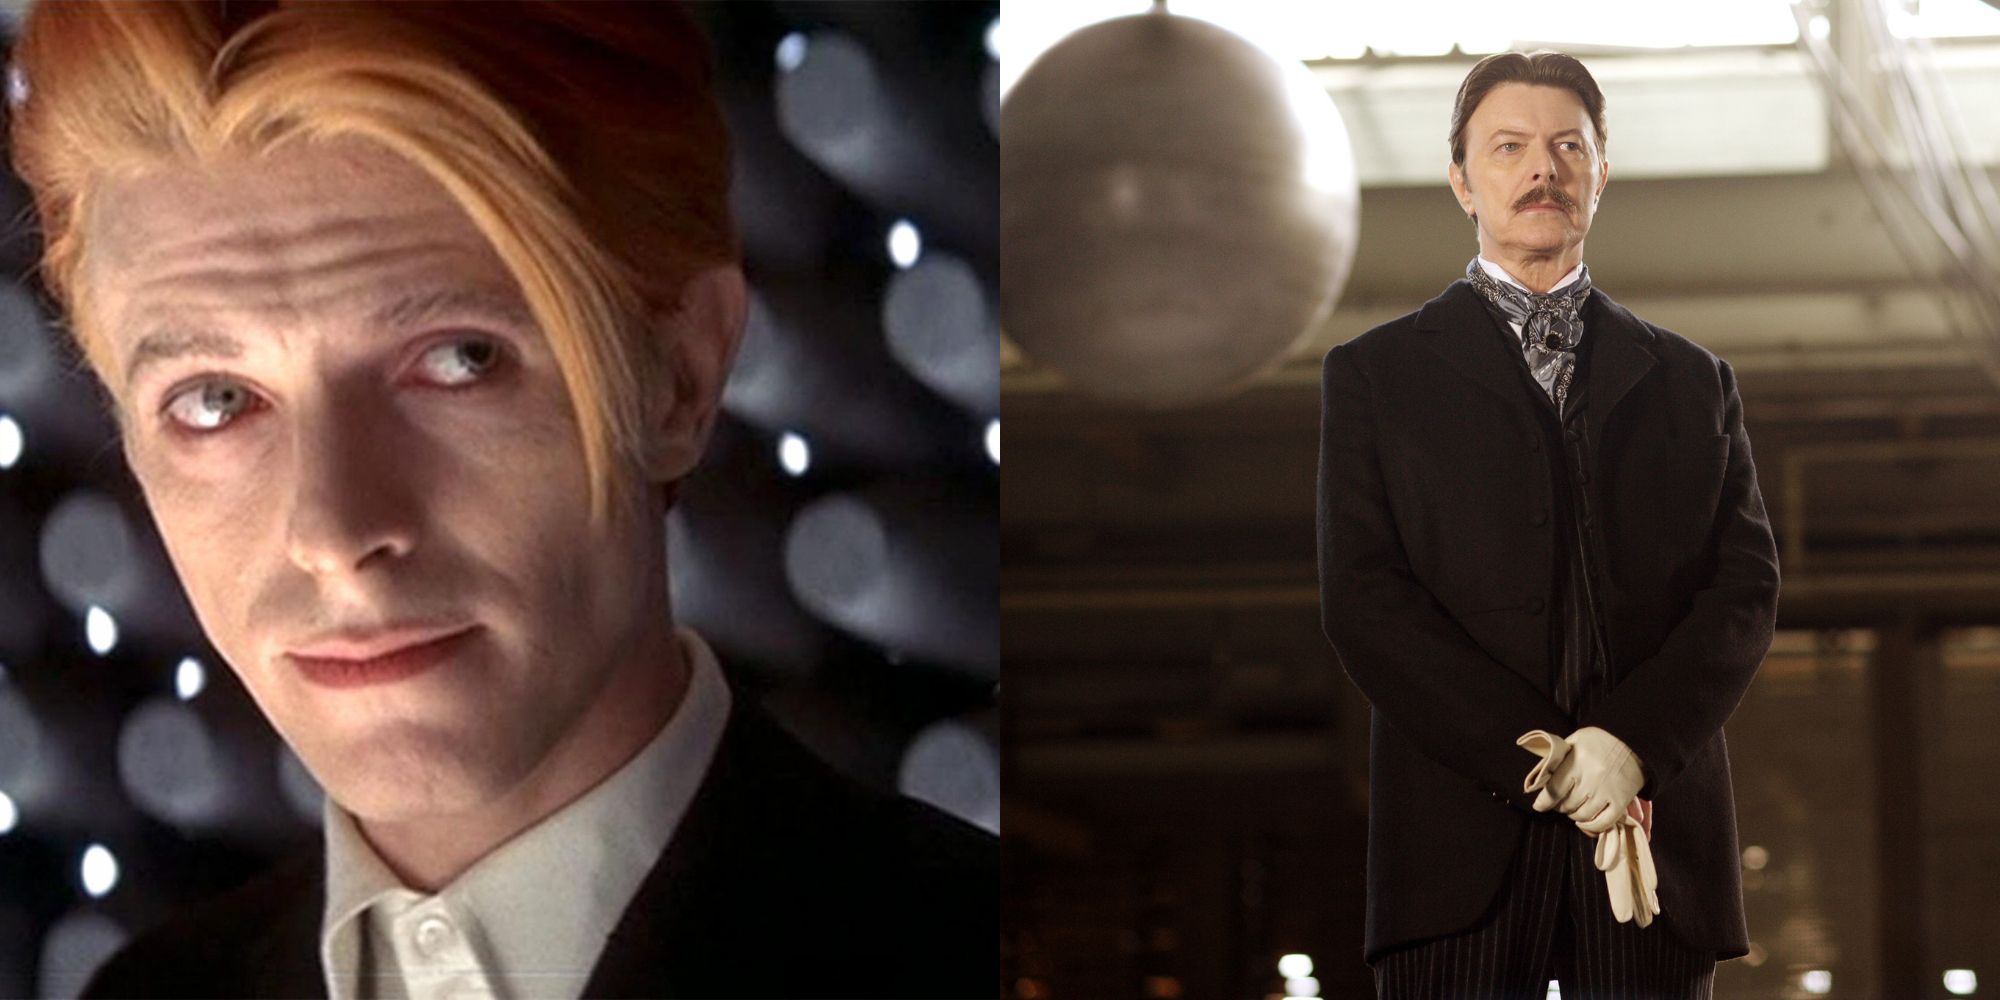 Split image showing David Bowie in The Man Who Fell to Earth and The Prestige.